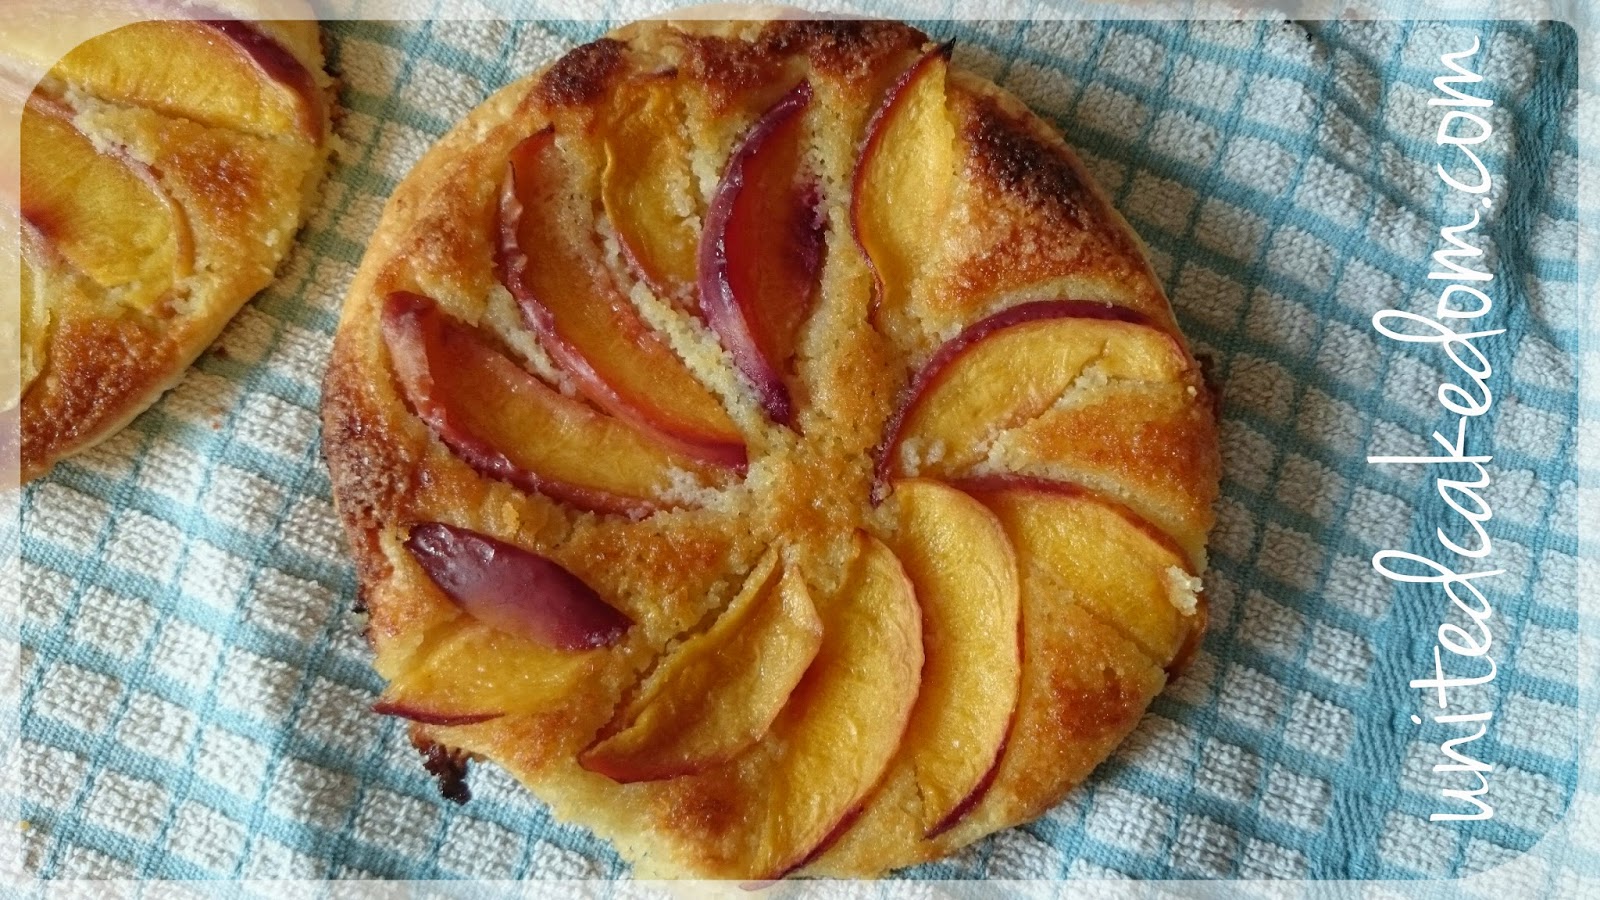 Almost Teddies Apple Cake and an OXO Egg Beater Giveaway!